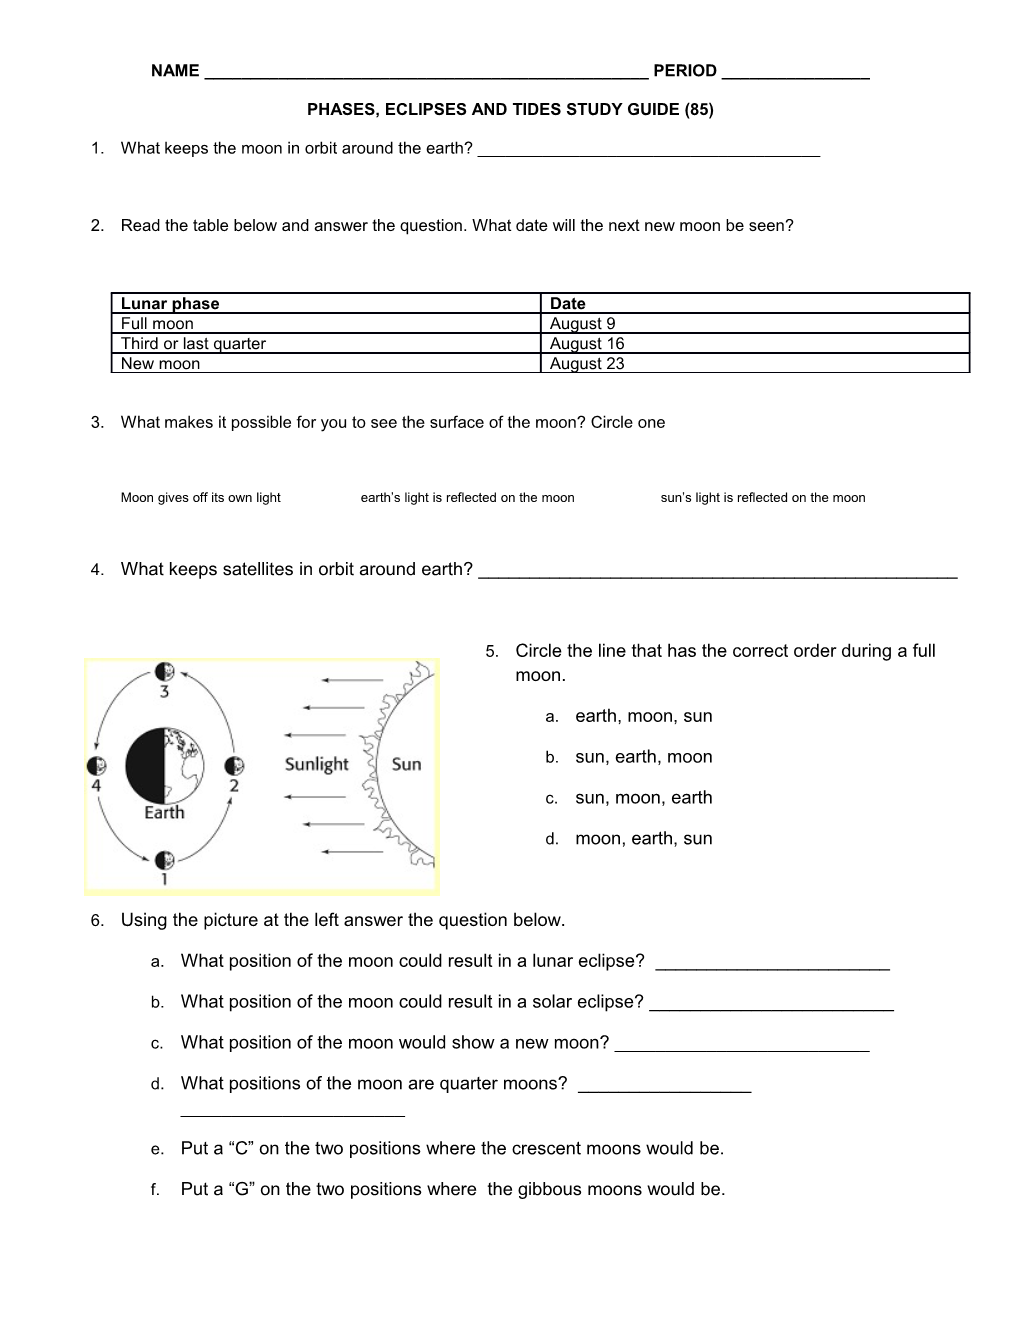 Phases, Eclipses and Tides Study Guide (85)